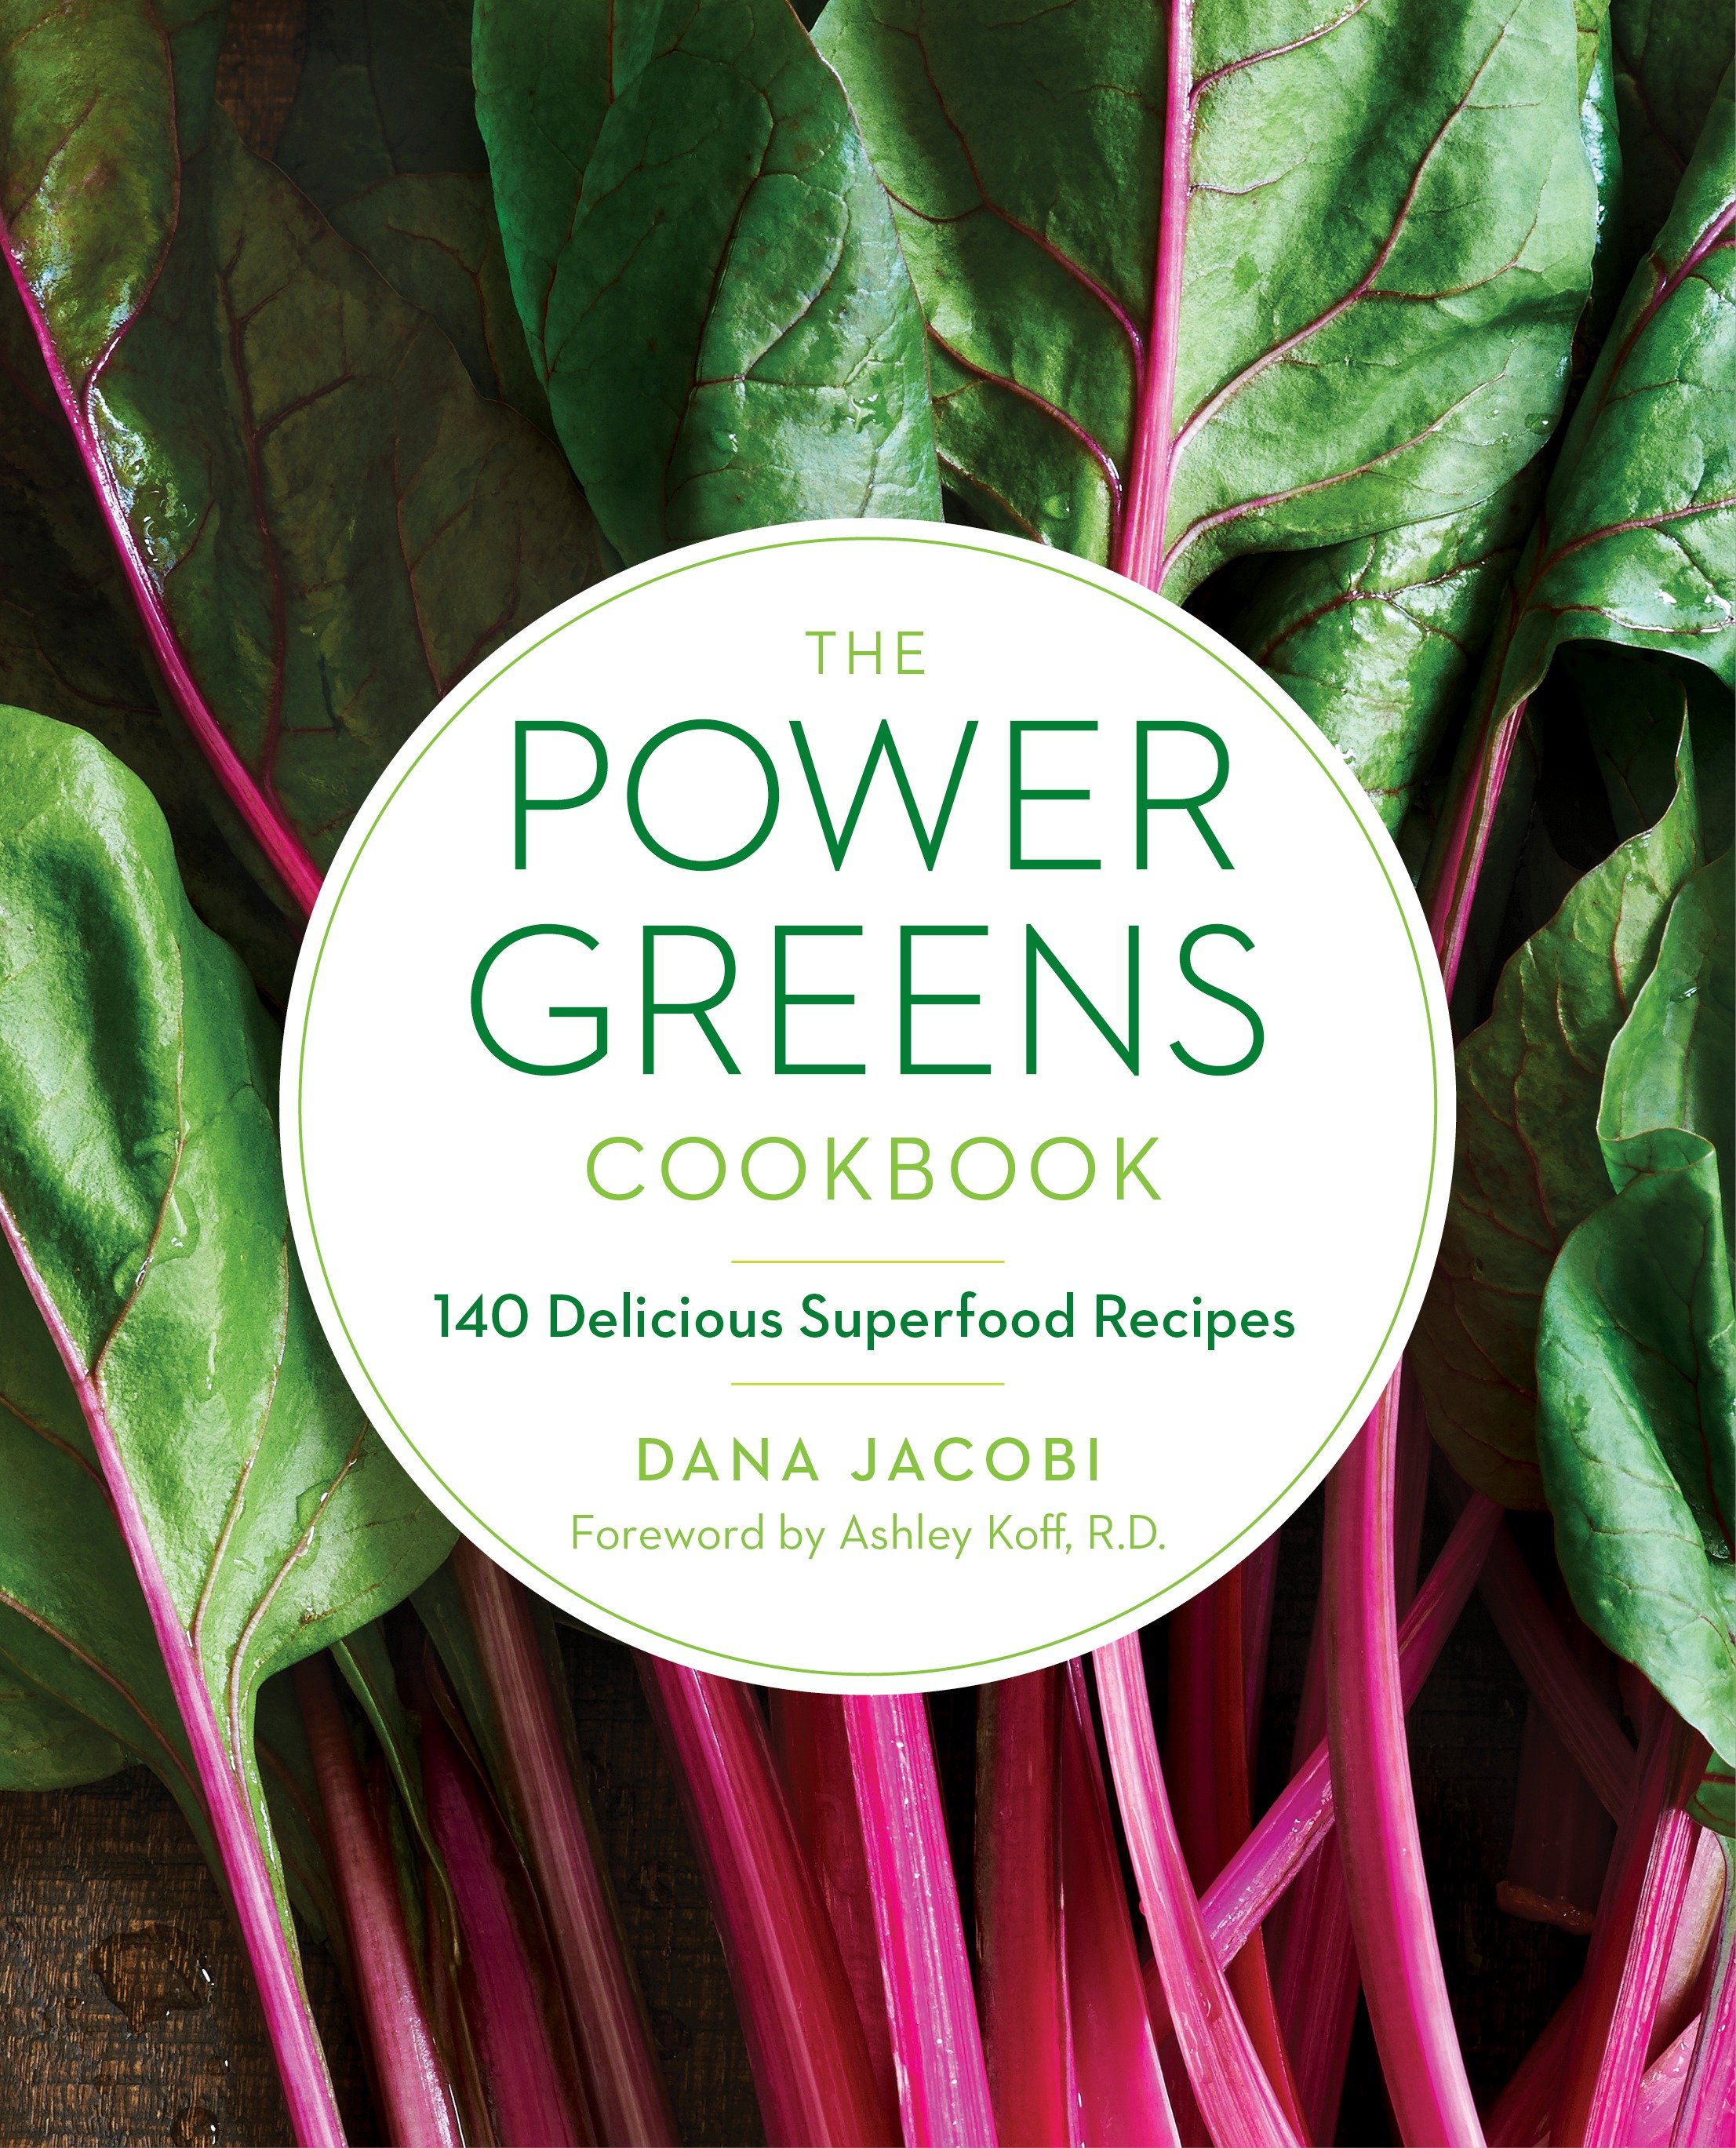 The power greens cookbook 140 delicious superfood recipes cover image